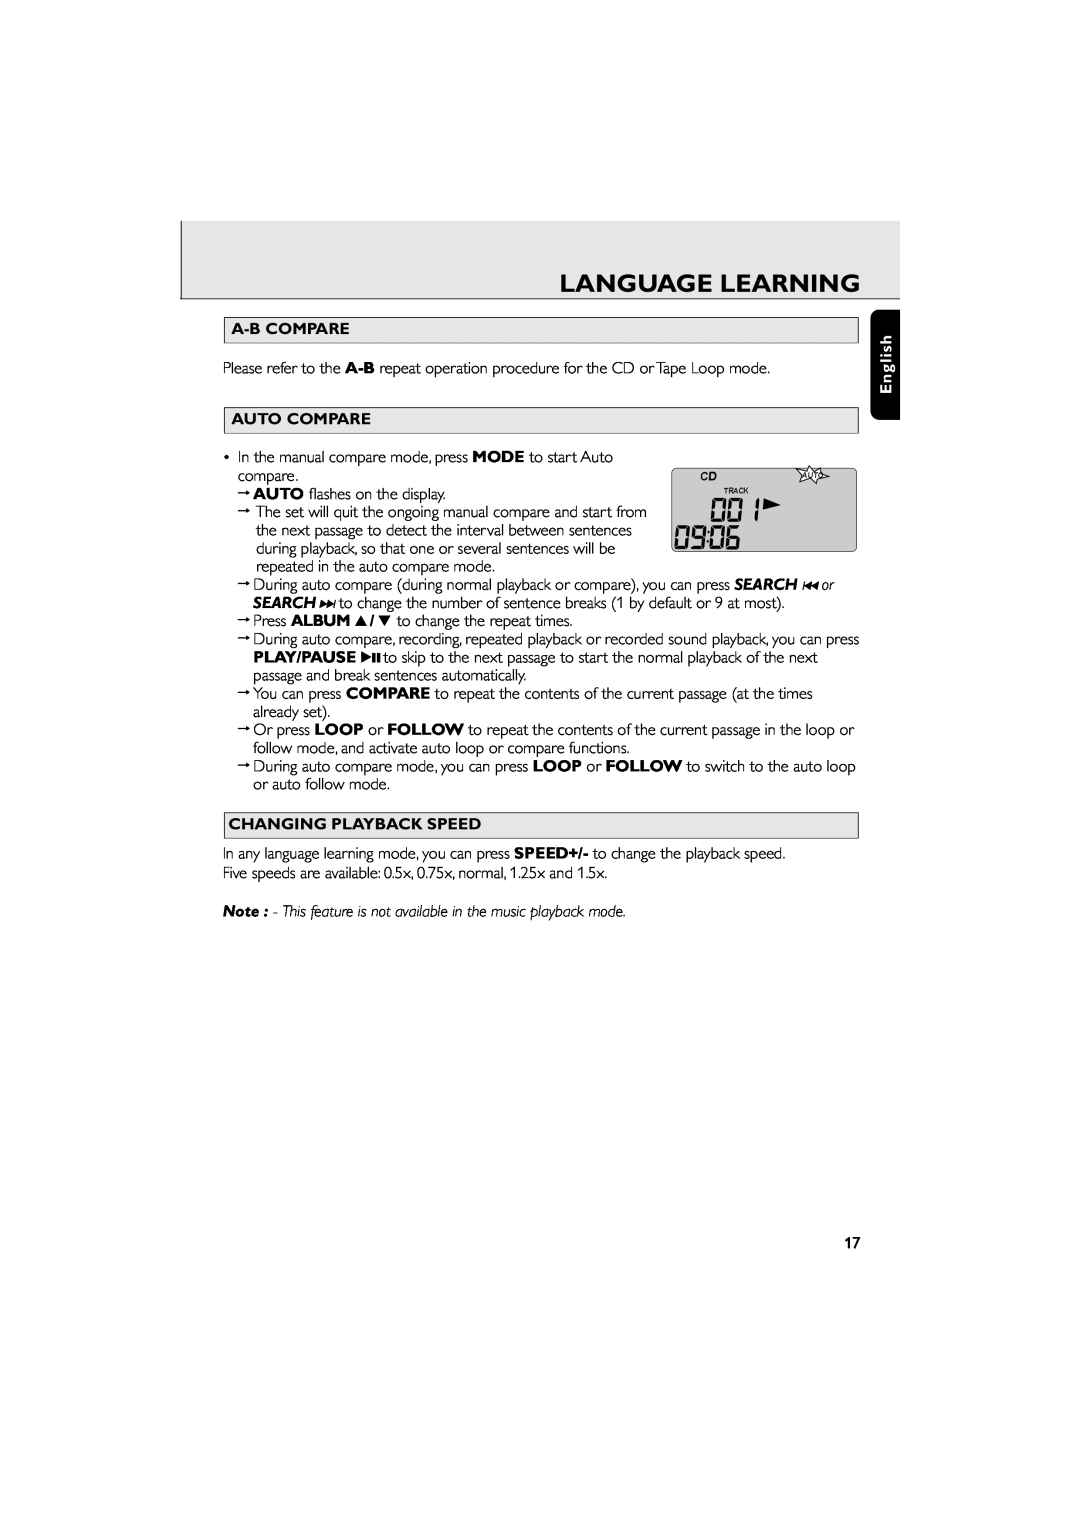 Philips AZ 6188 manual Language Learning, A-Bcompare, Auto Compare, Changing Playback Speed, English 